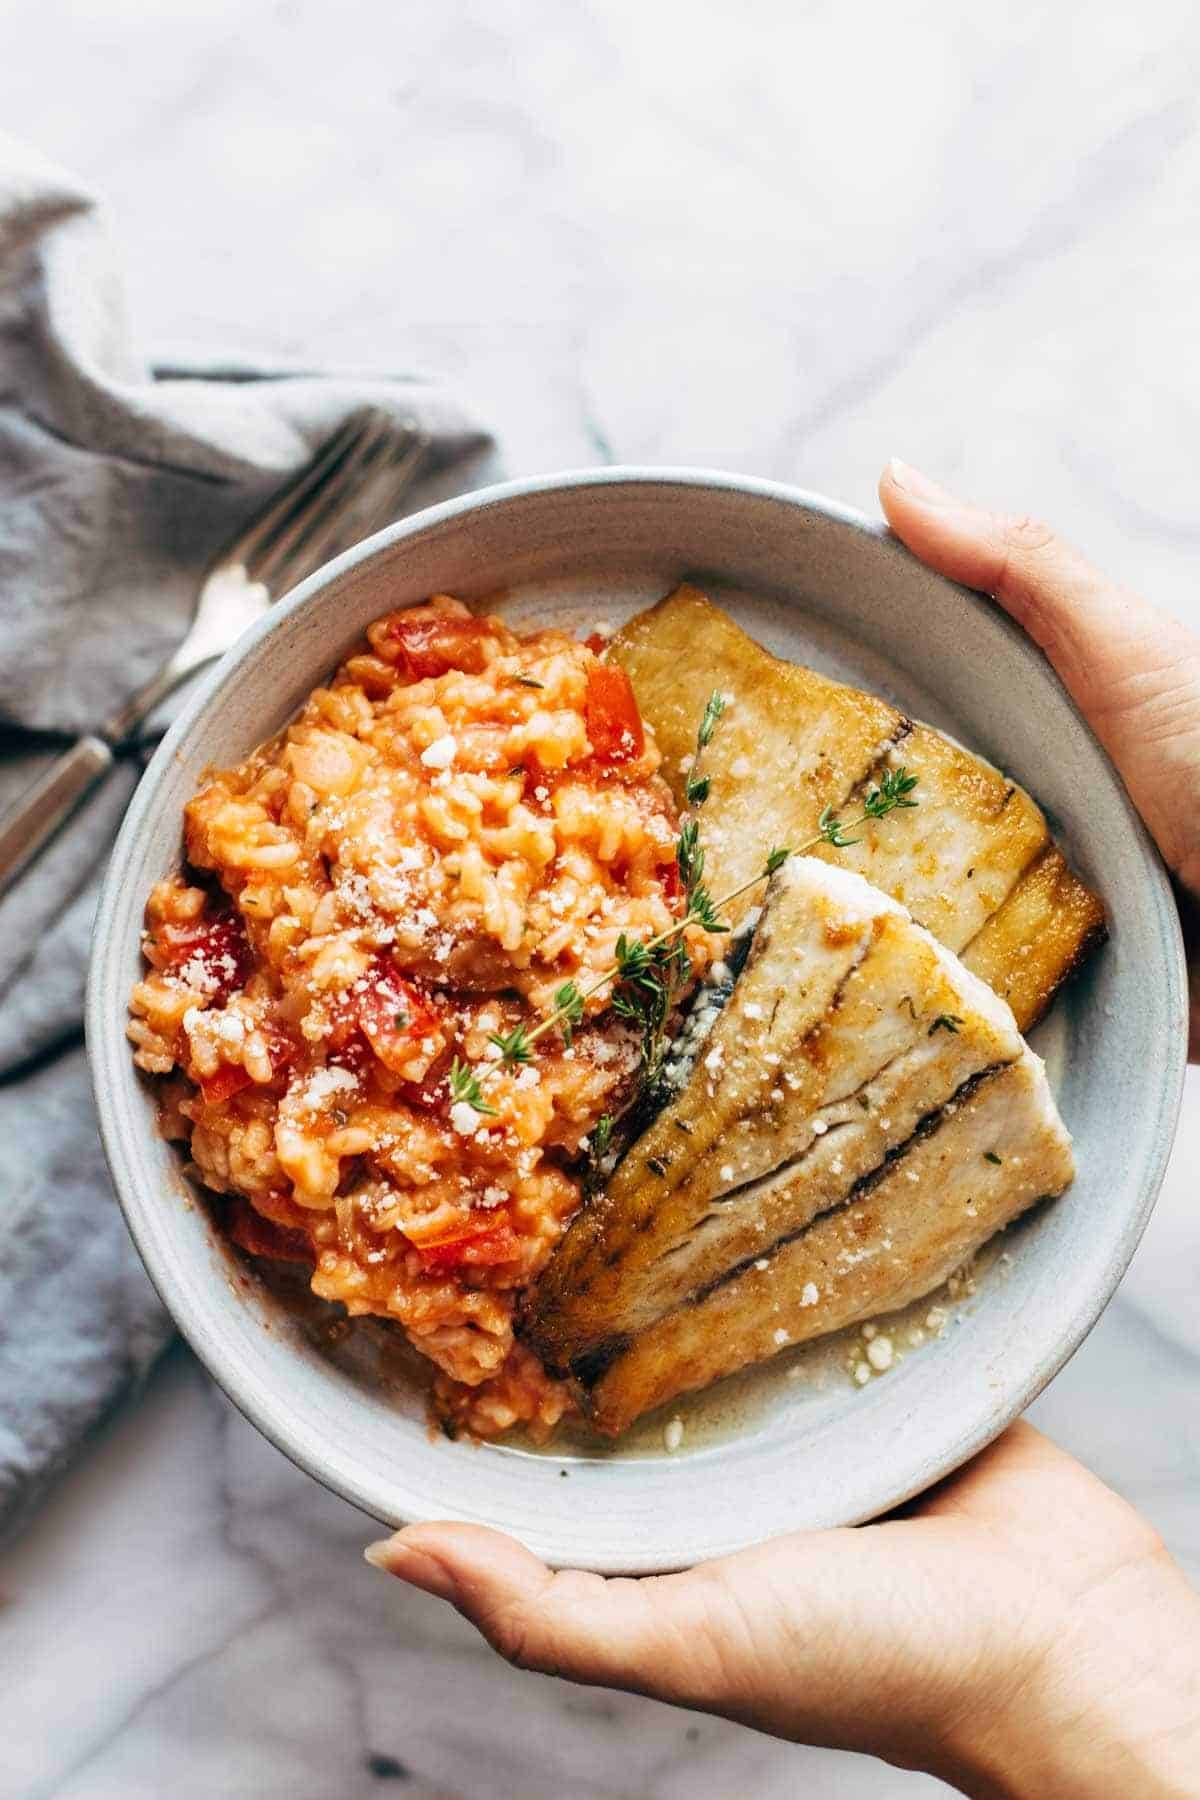 Hands Holding a plate of Creamy Tomato Risotto with Pan Fried Barramundi